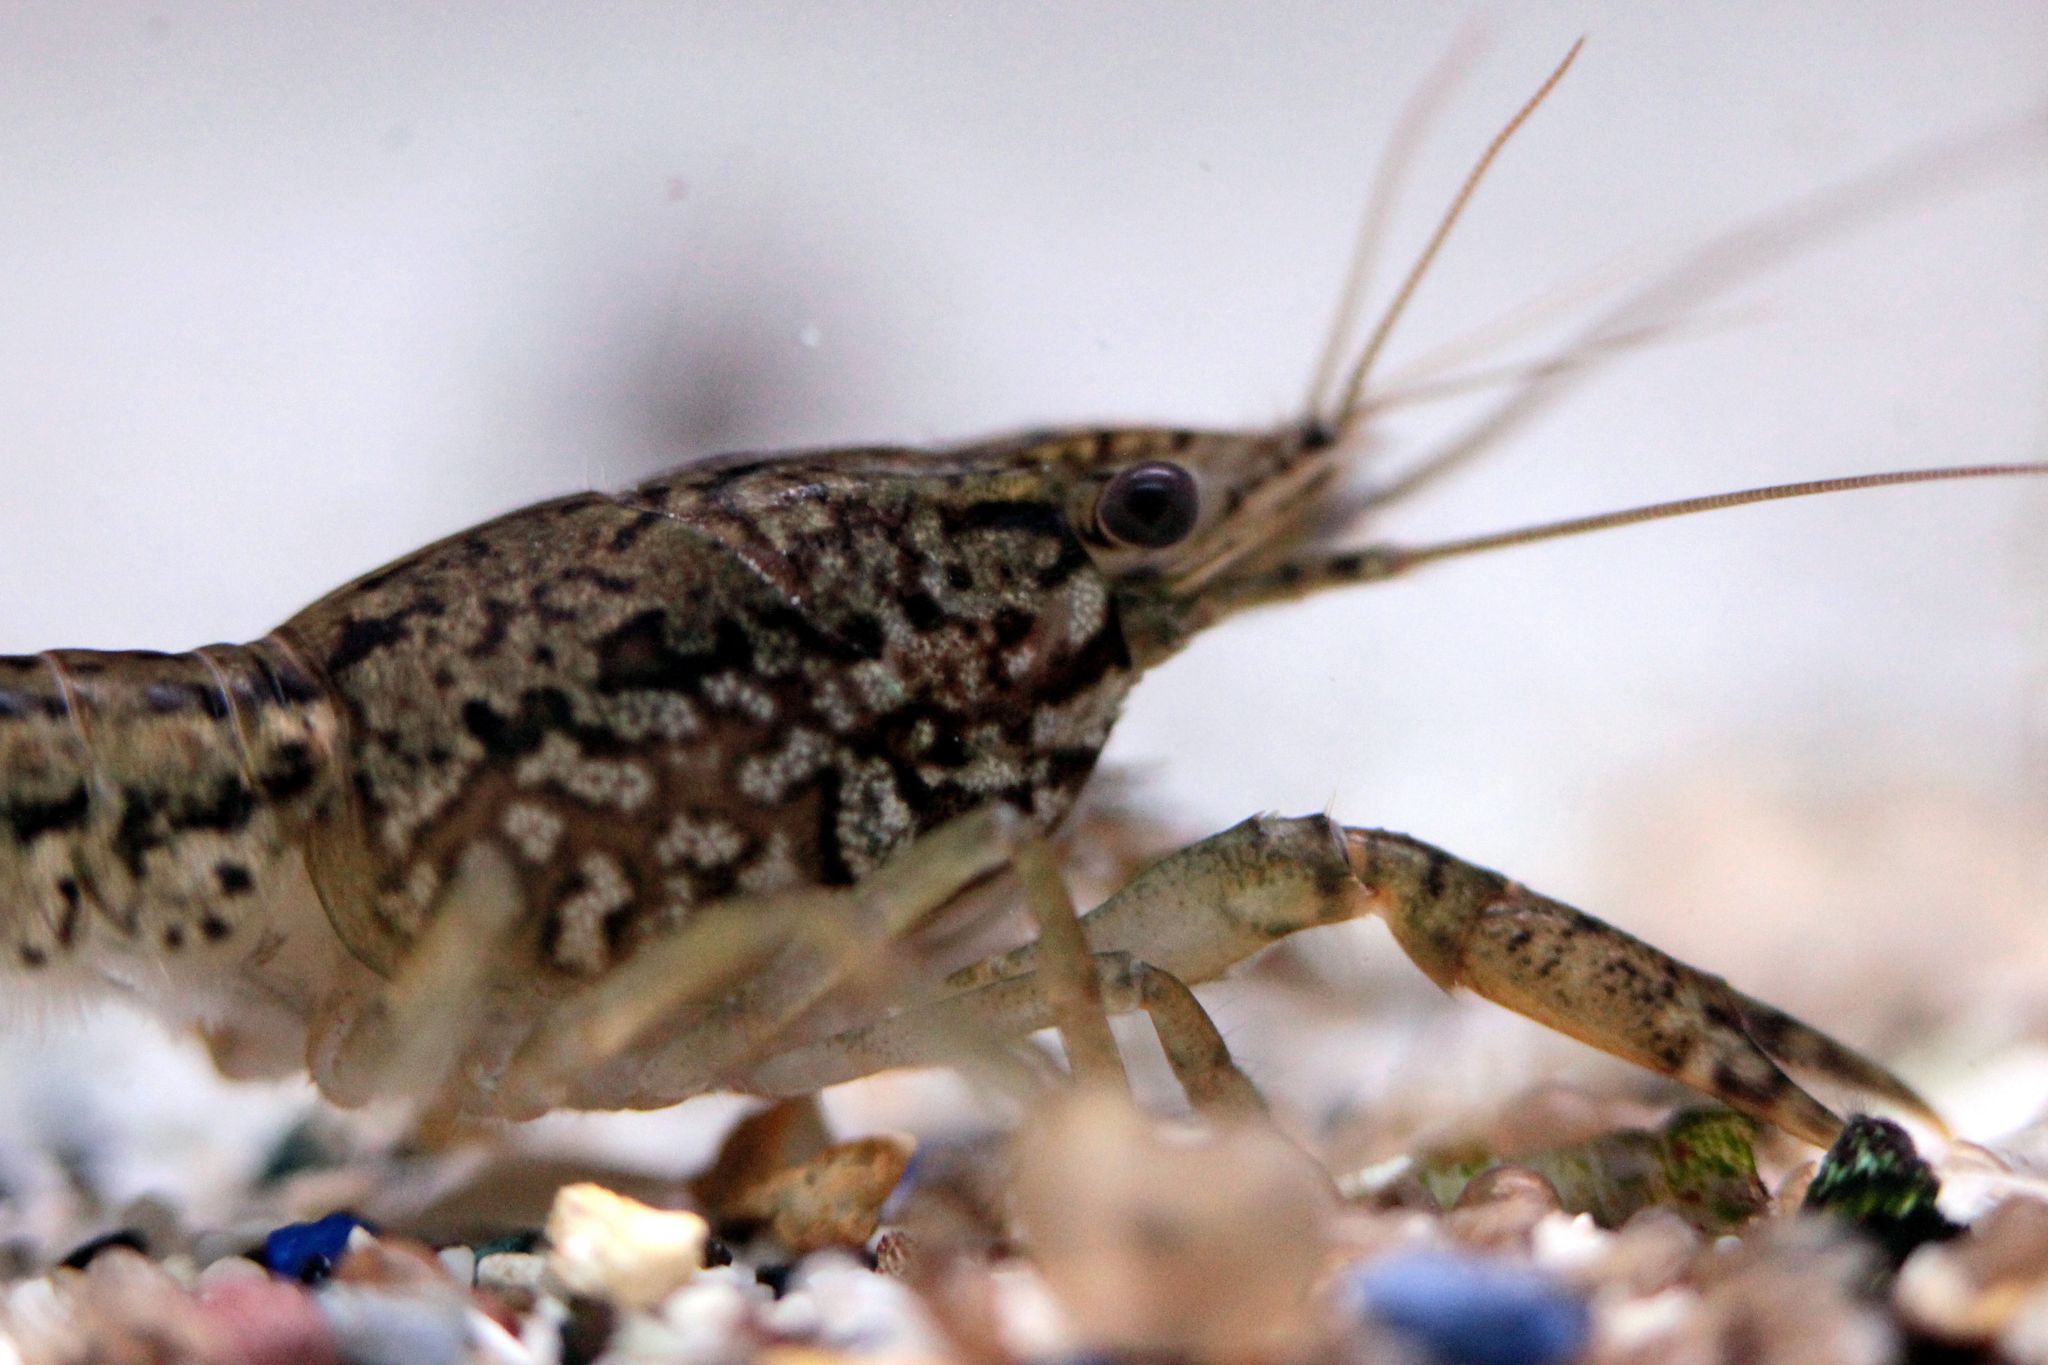 A marbled crayfish enjoys a swim in his fish tank in Wiesbaden, Germany, 18 August 2010